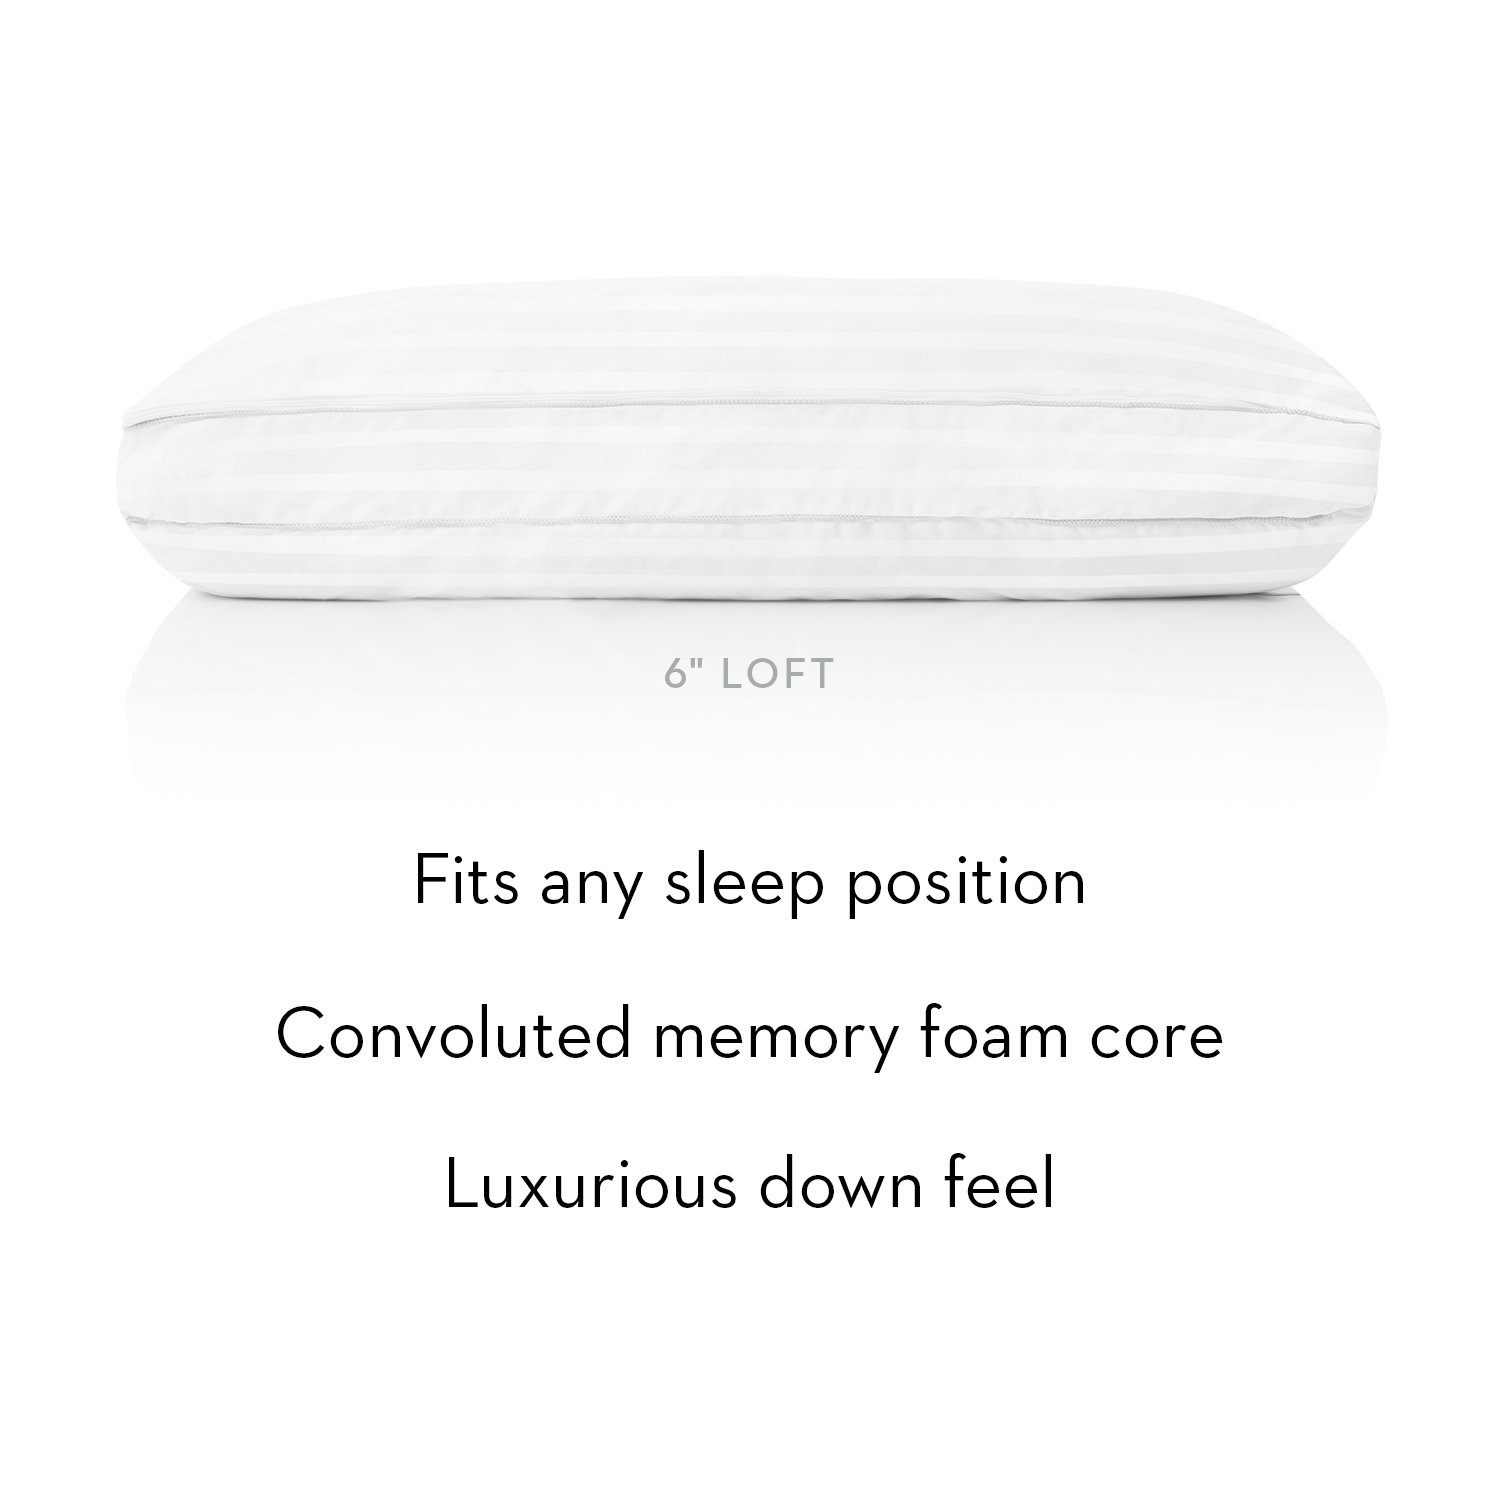 Convolution Pillow Side View with Description of Features